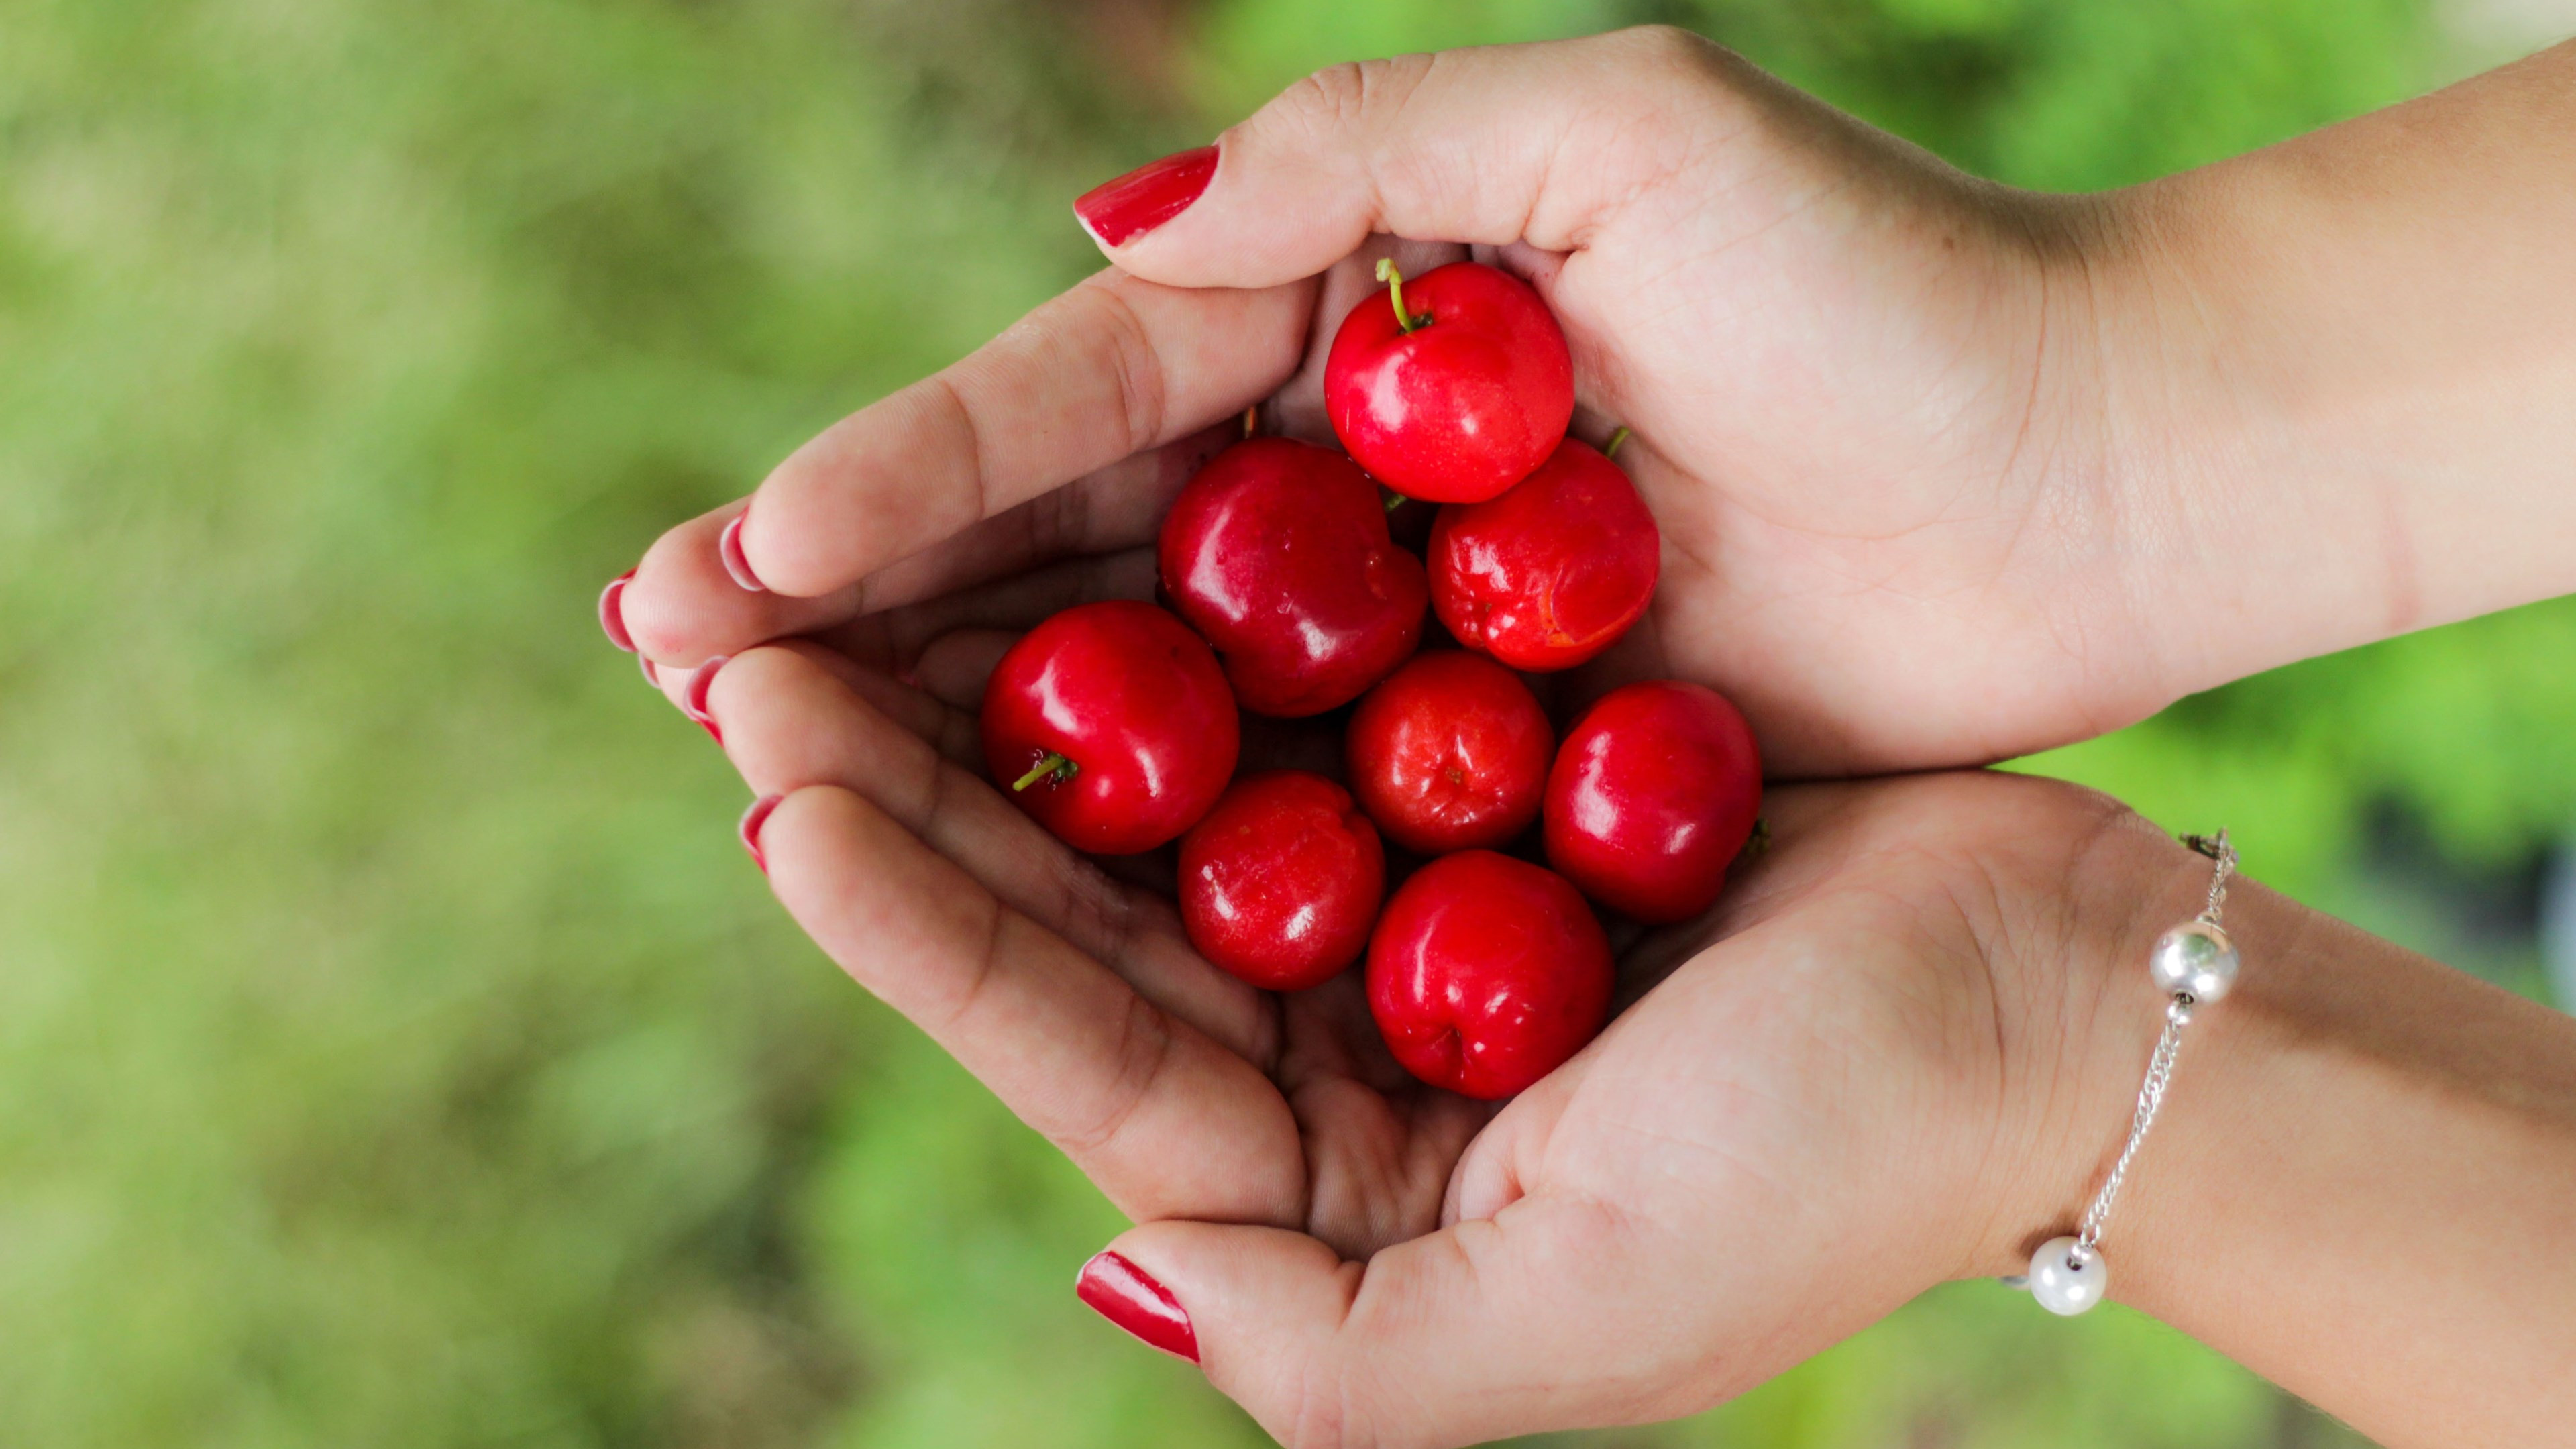 Hands filled with cherries wallpaper 3840x2160